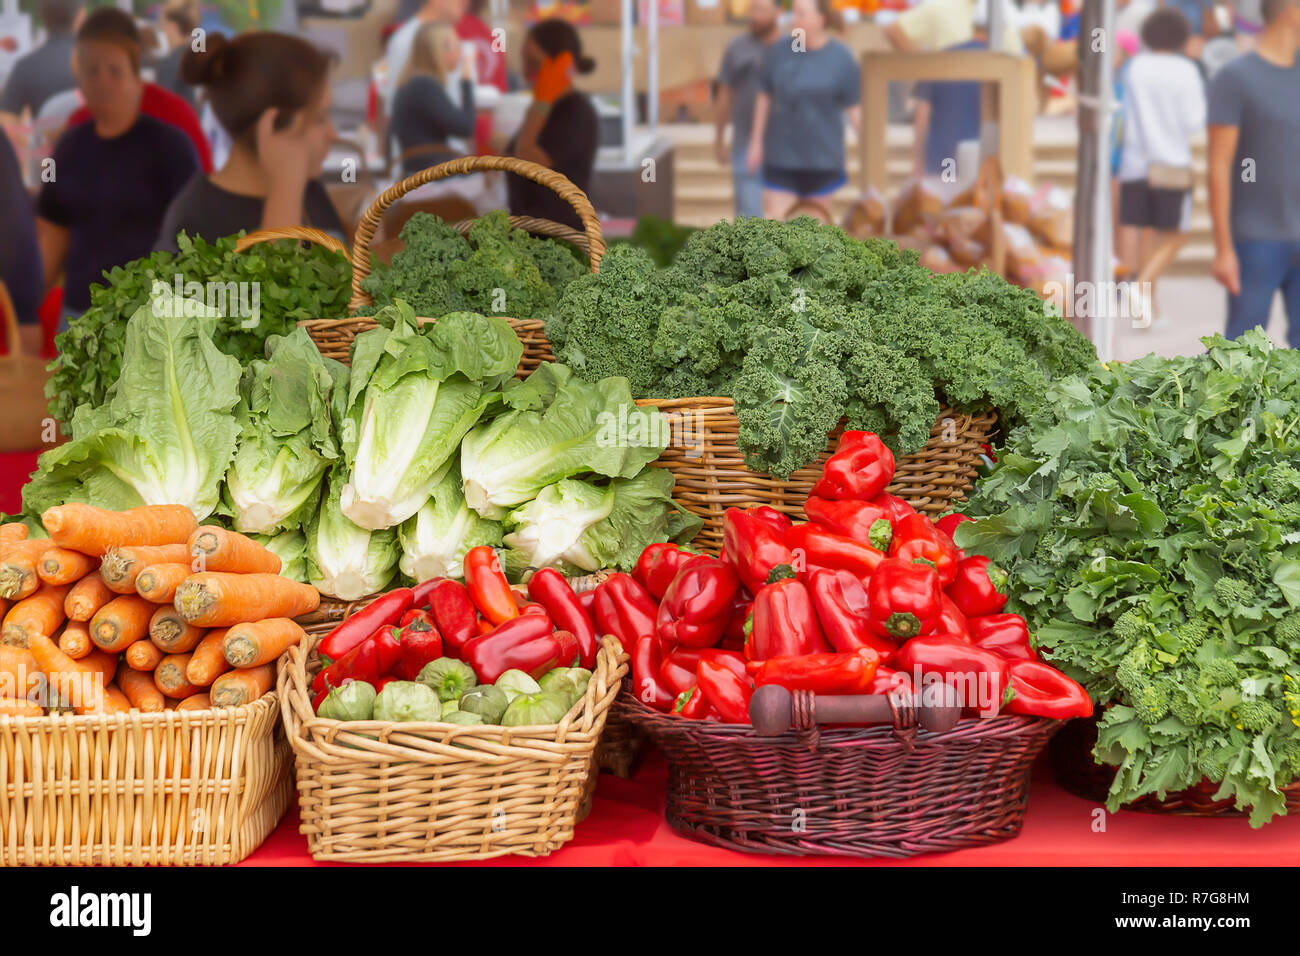 Arranged baskets are filled with red peppers, carrots, kale. a verity of greens displayed for all to see. Stock Photo